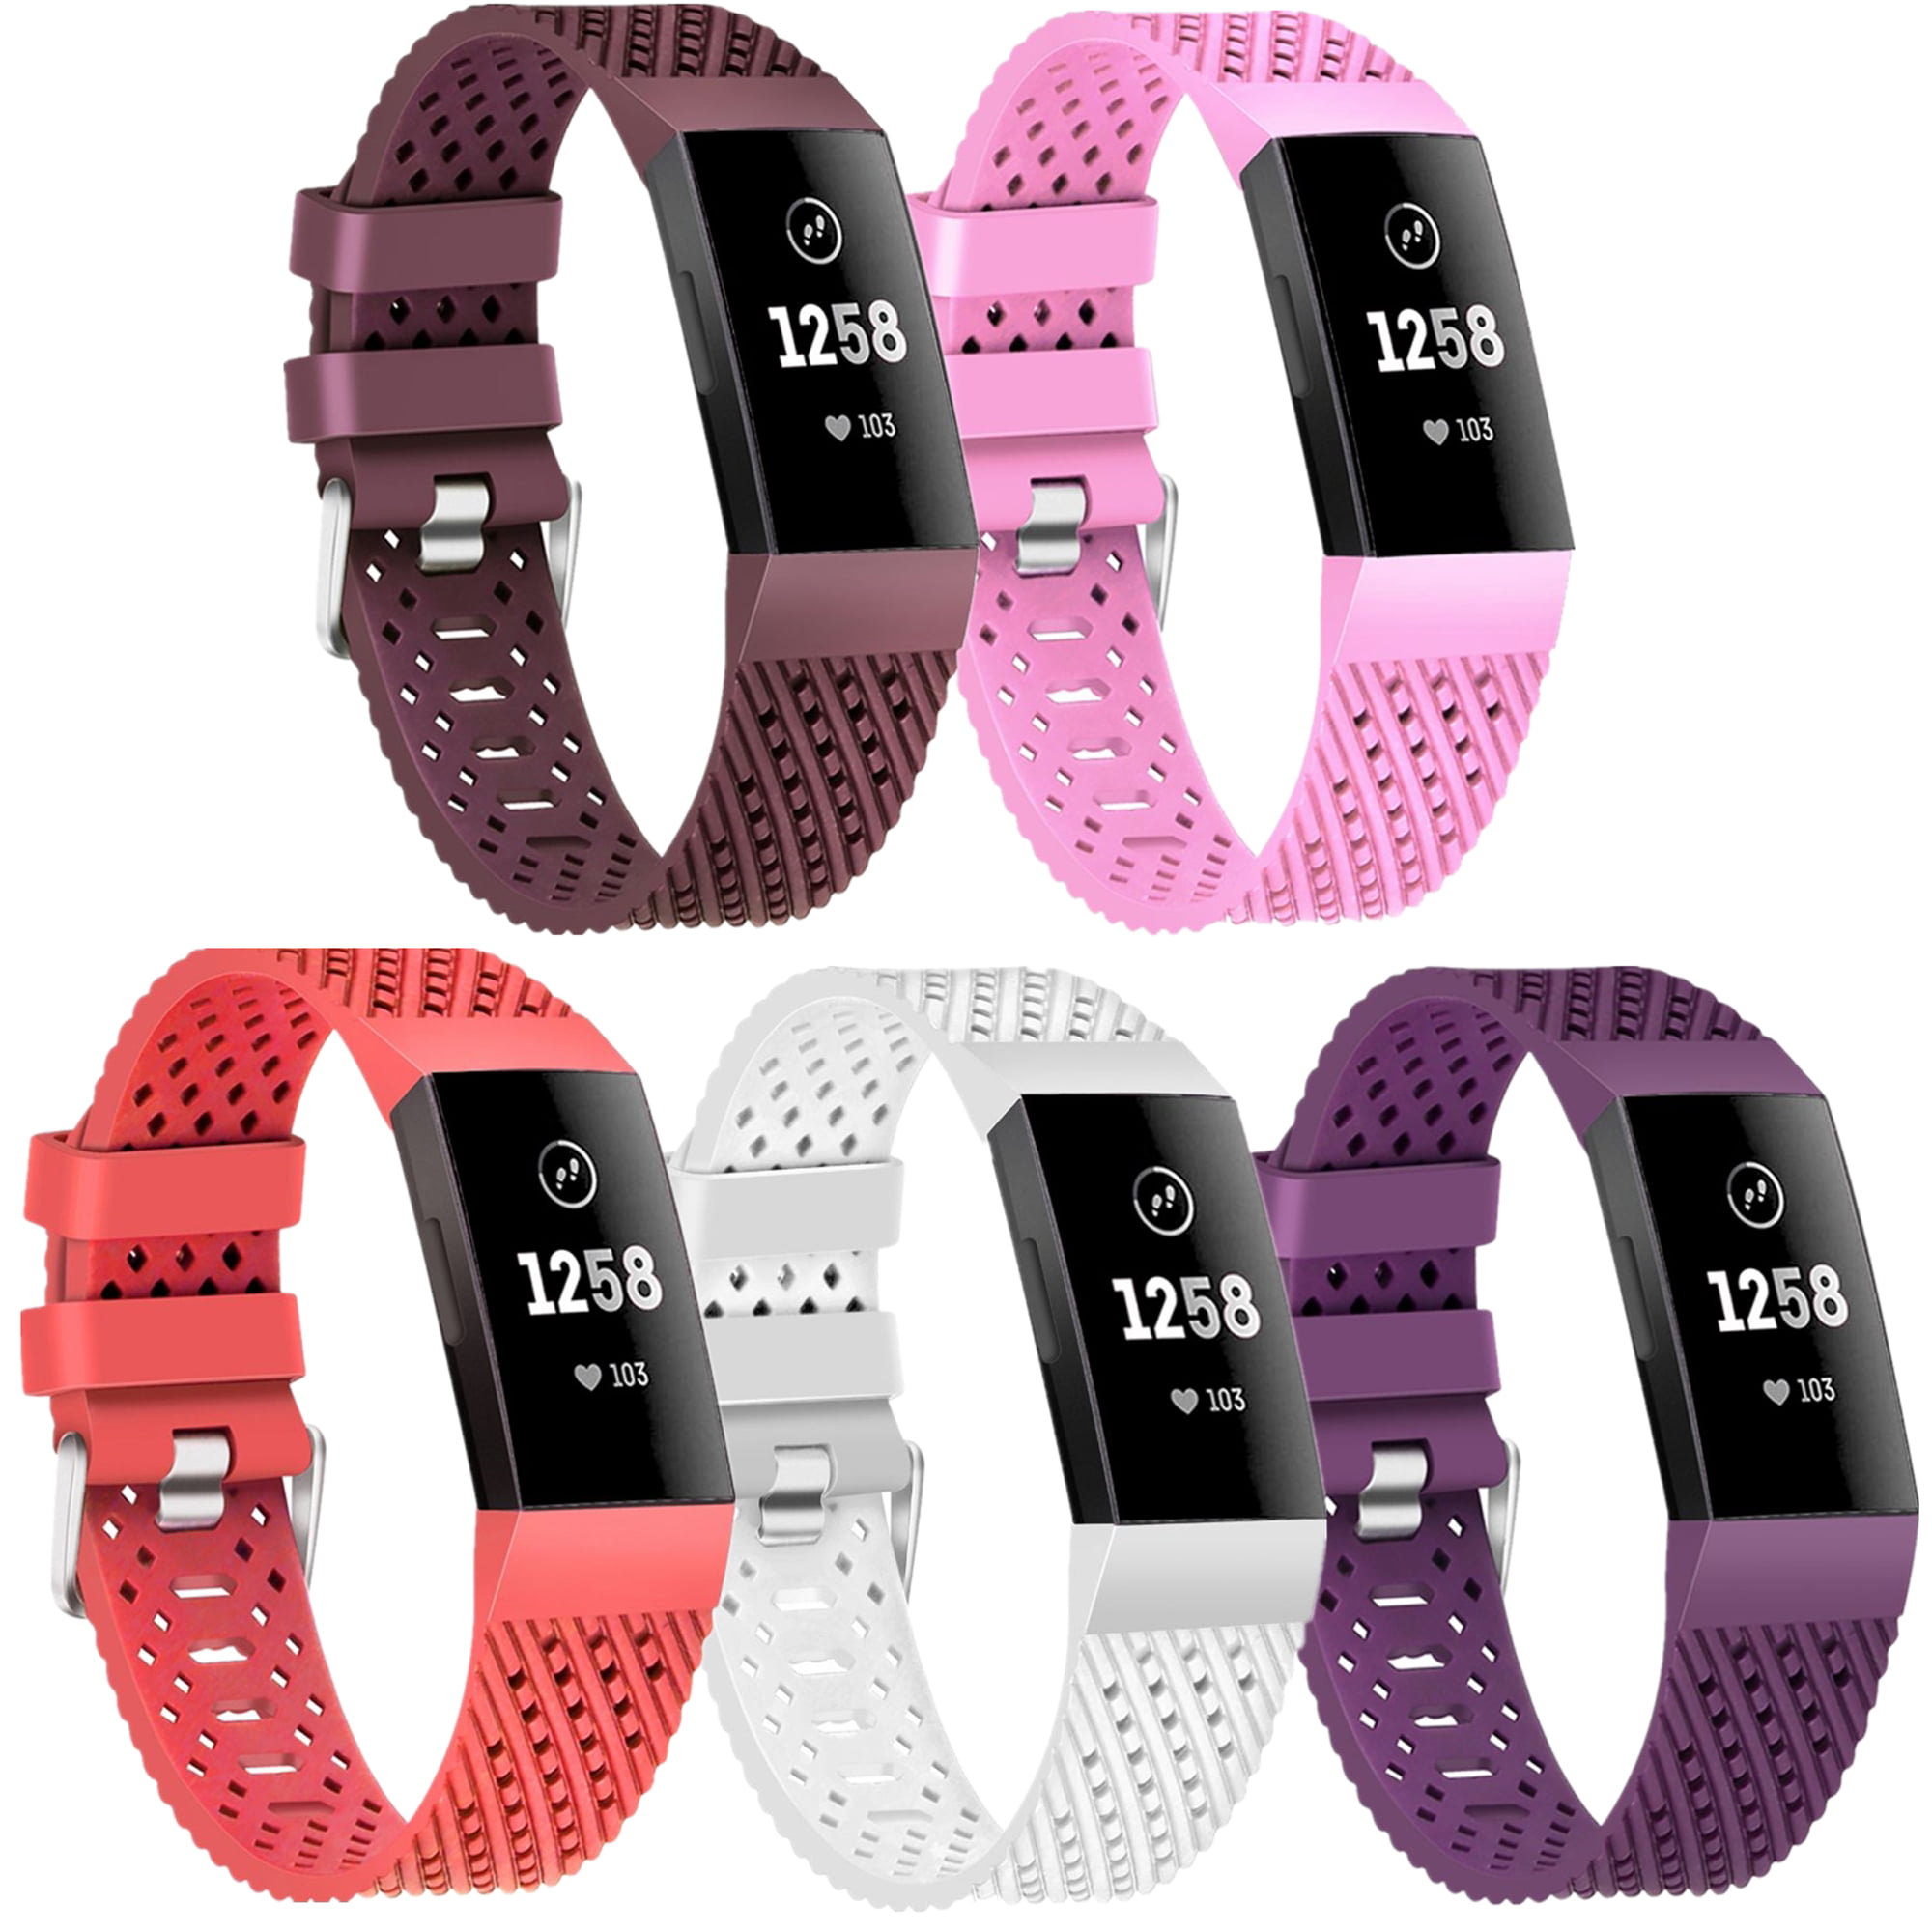 fitbit charge 3 wristbands walmart